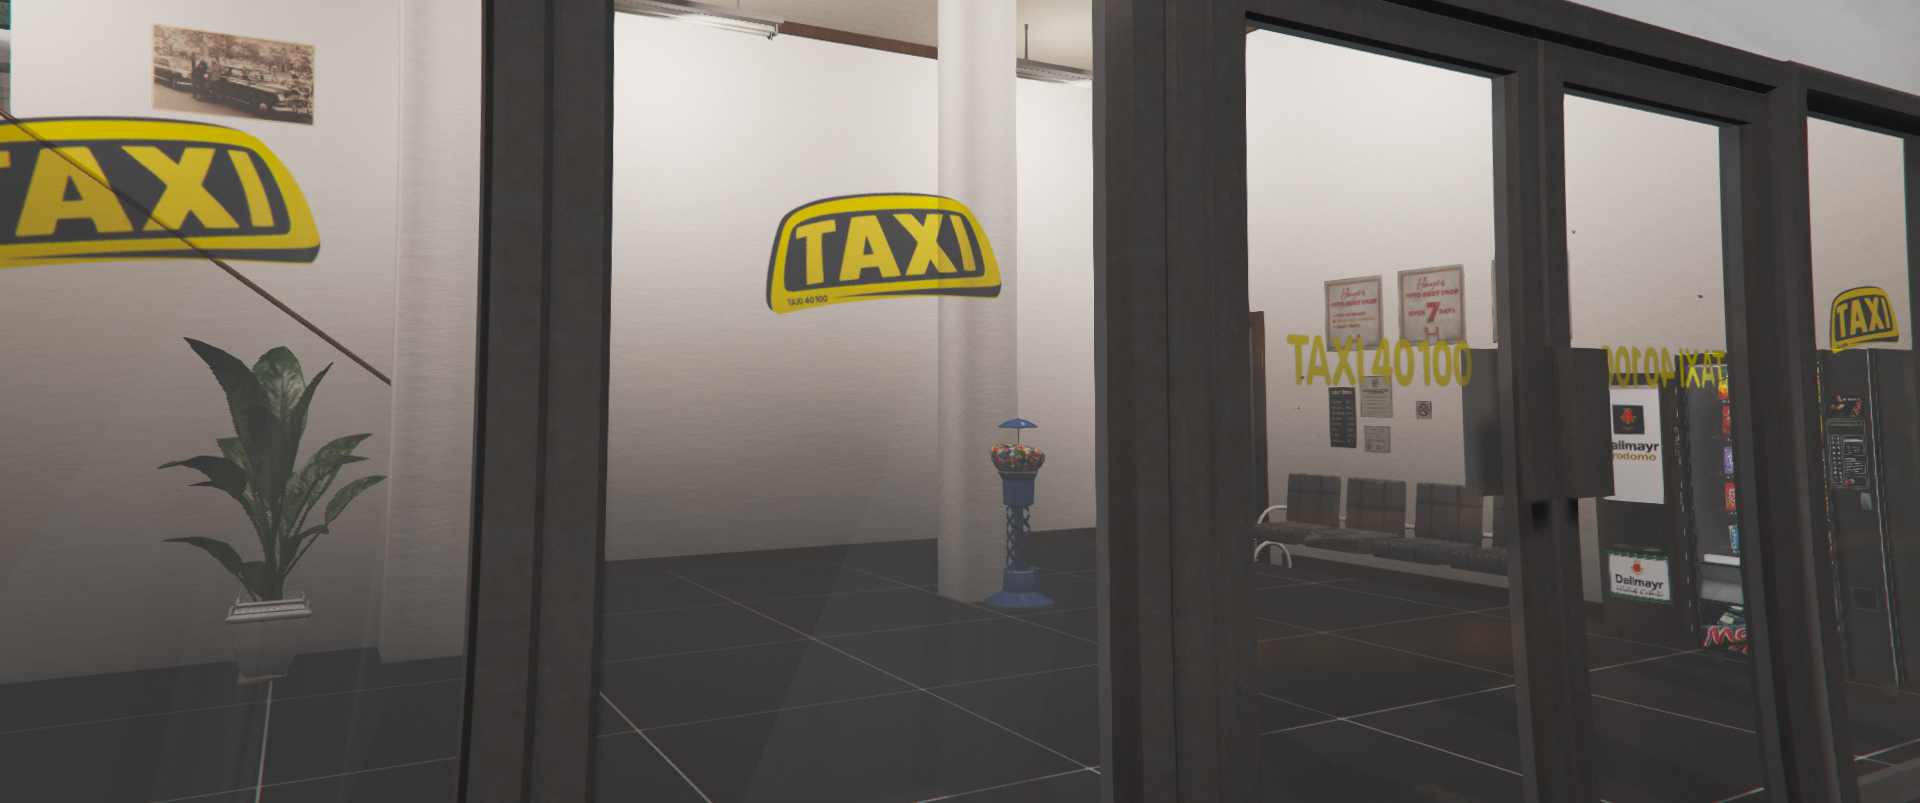 taxi_front3